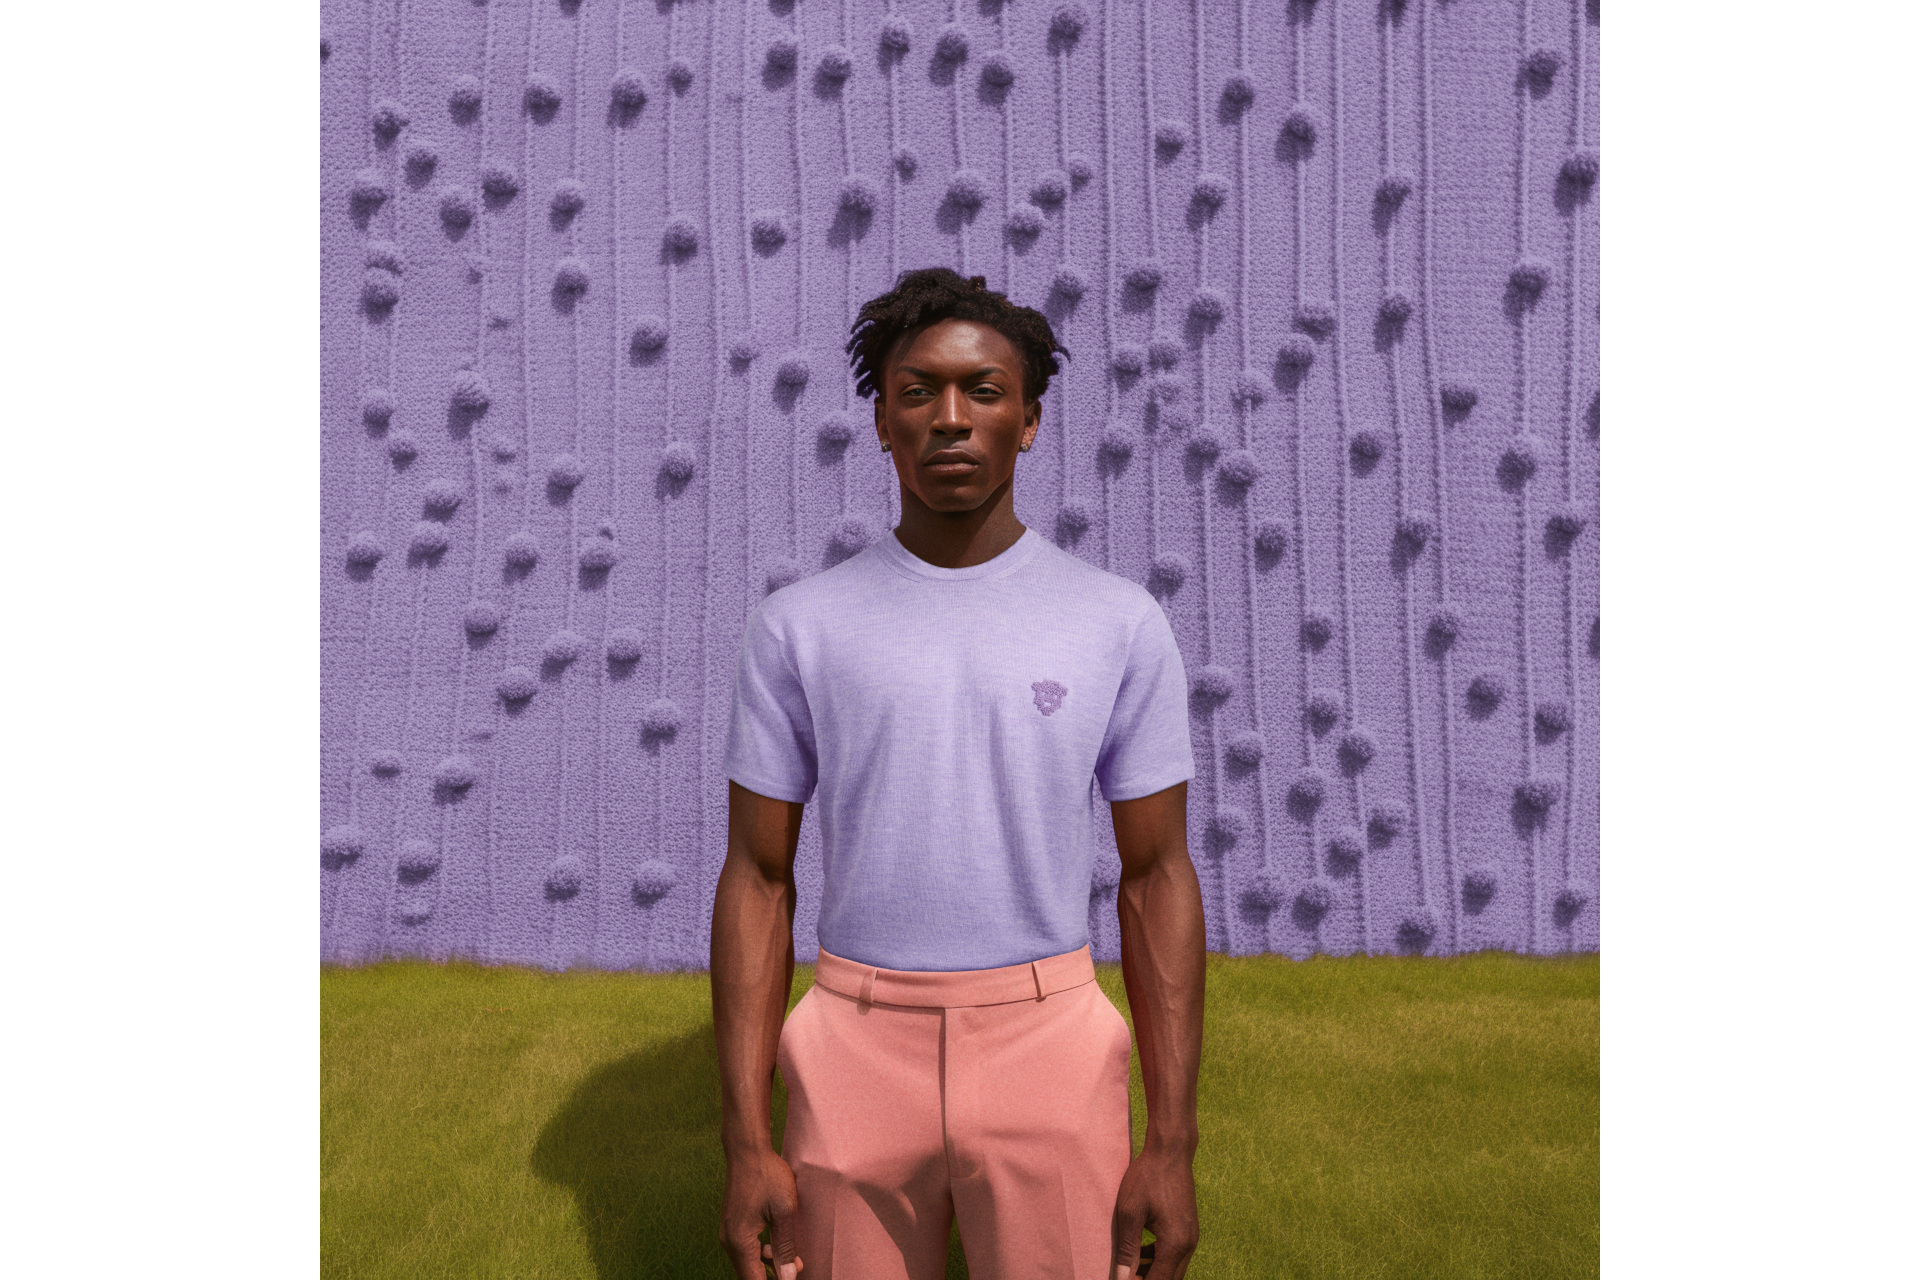 Man in purple t-shirt in front of purple background